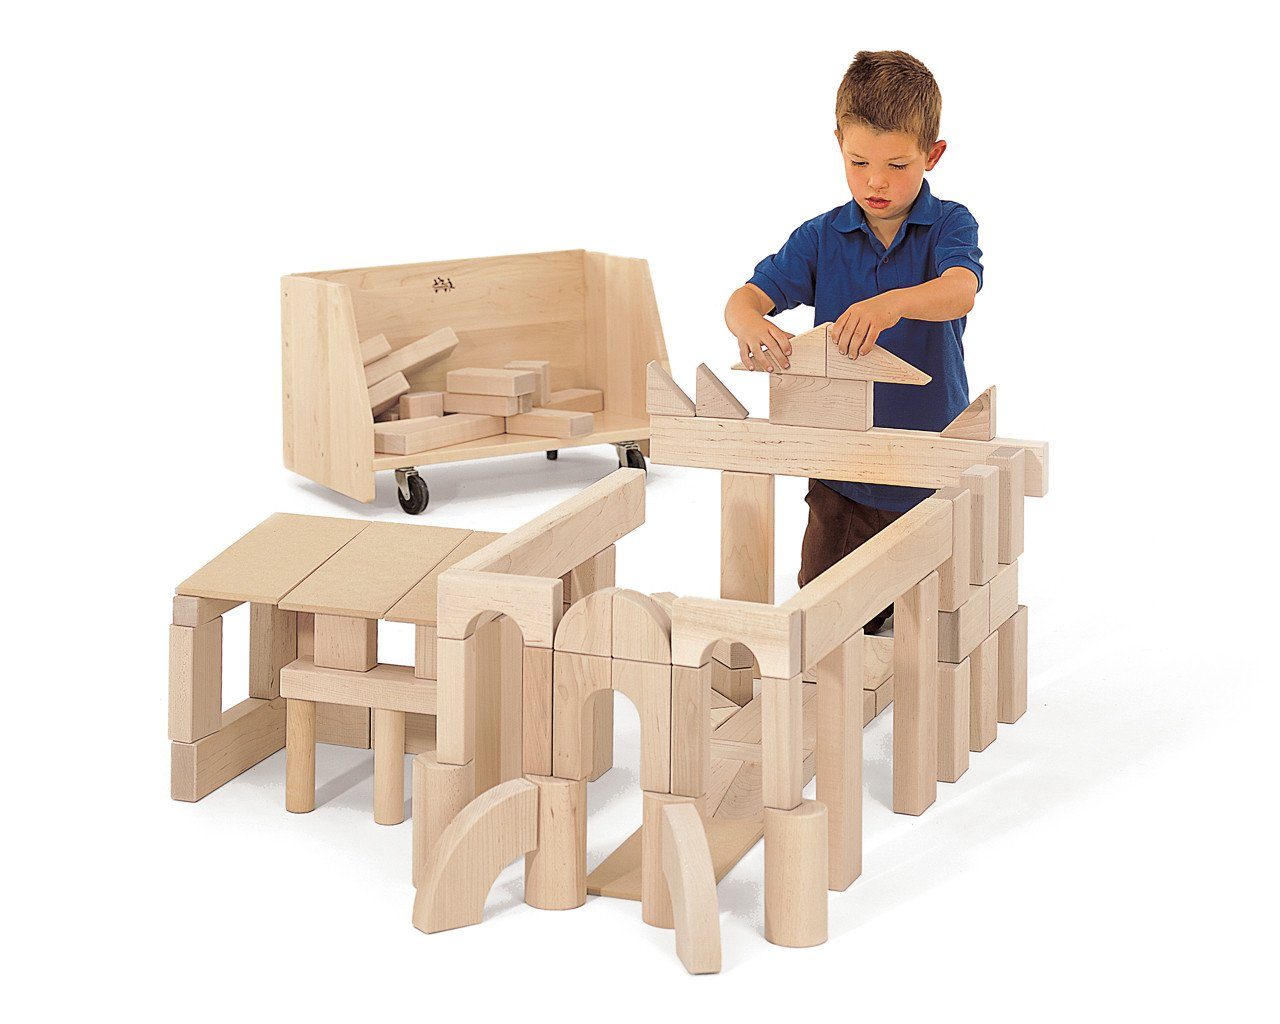 Unit Blocks - Play with a Purpose